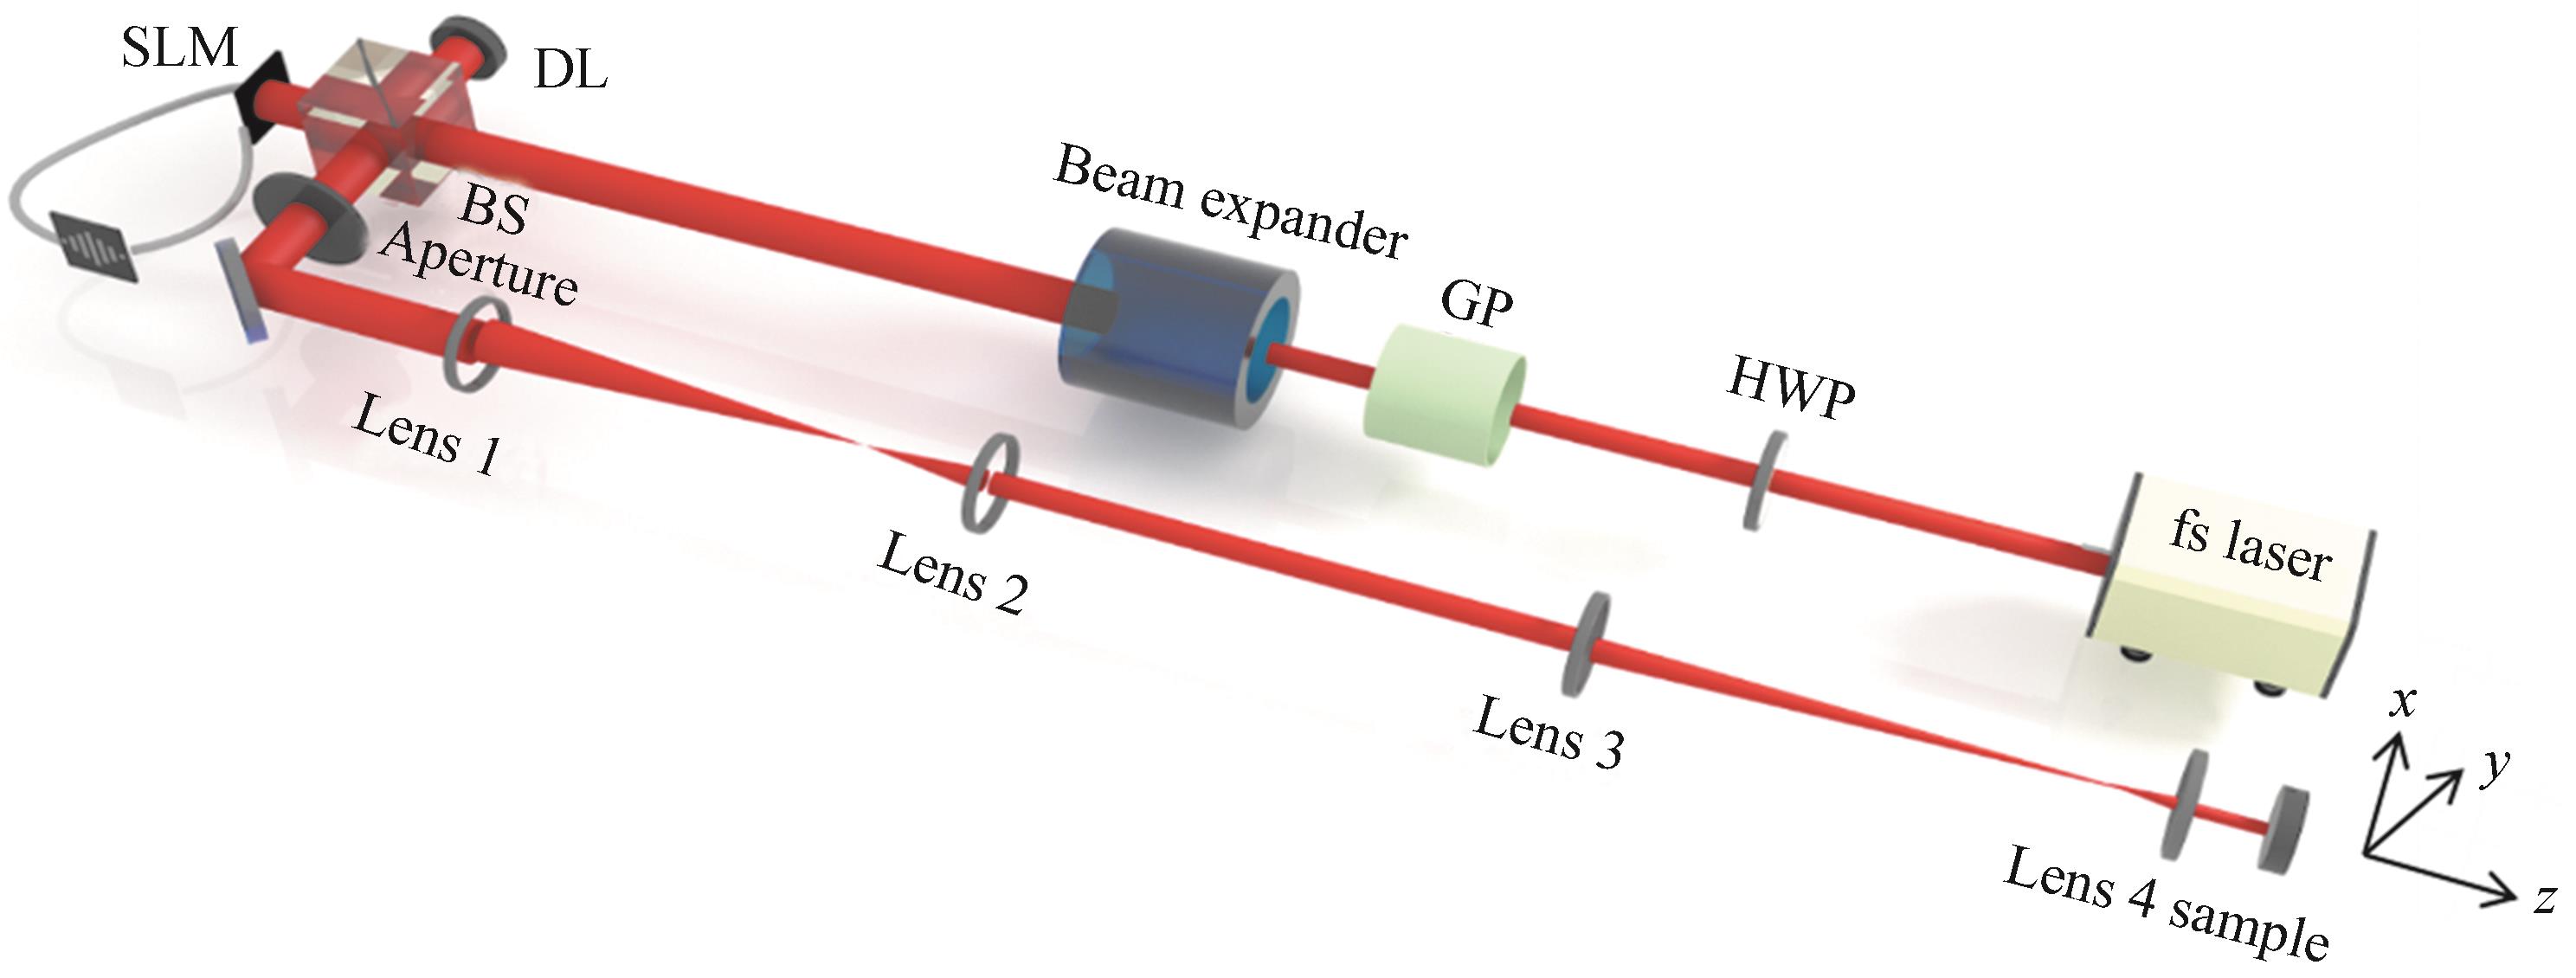 Experimental setup of the spatiotemporal-interference-based femtosecond laser shaping